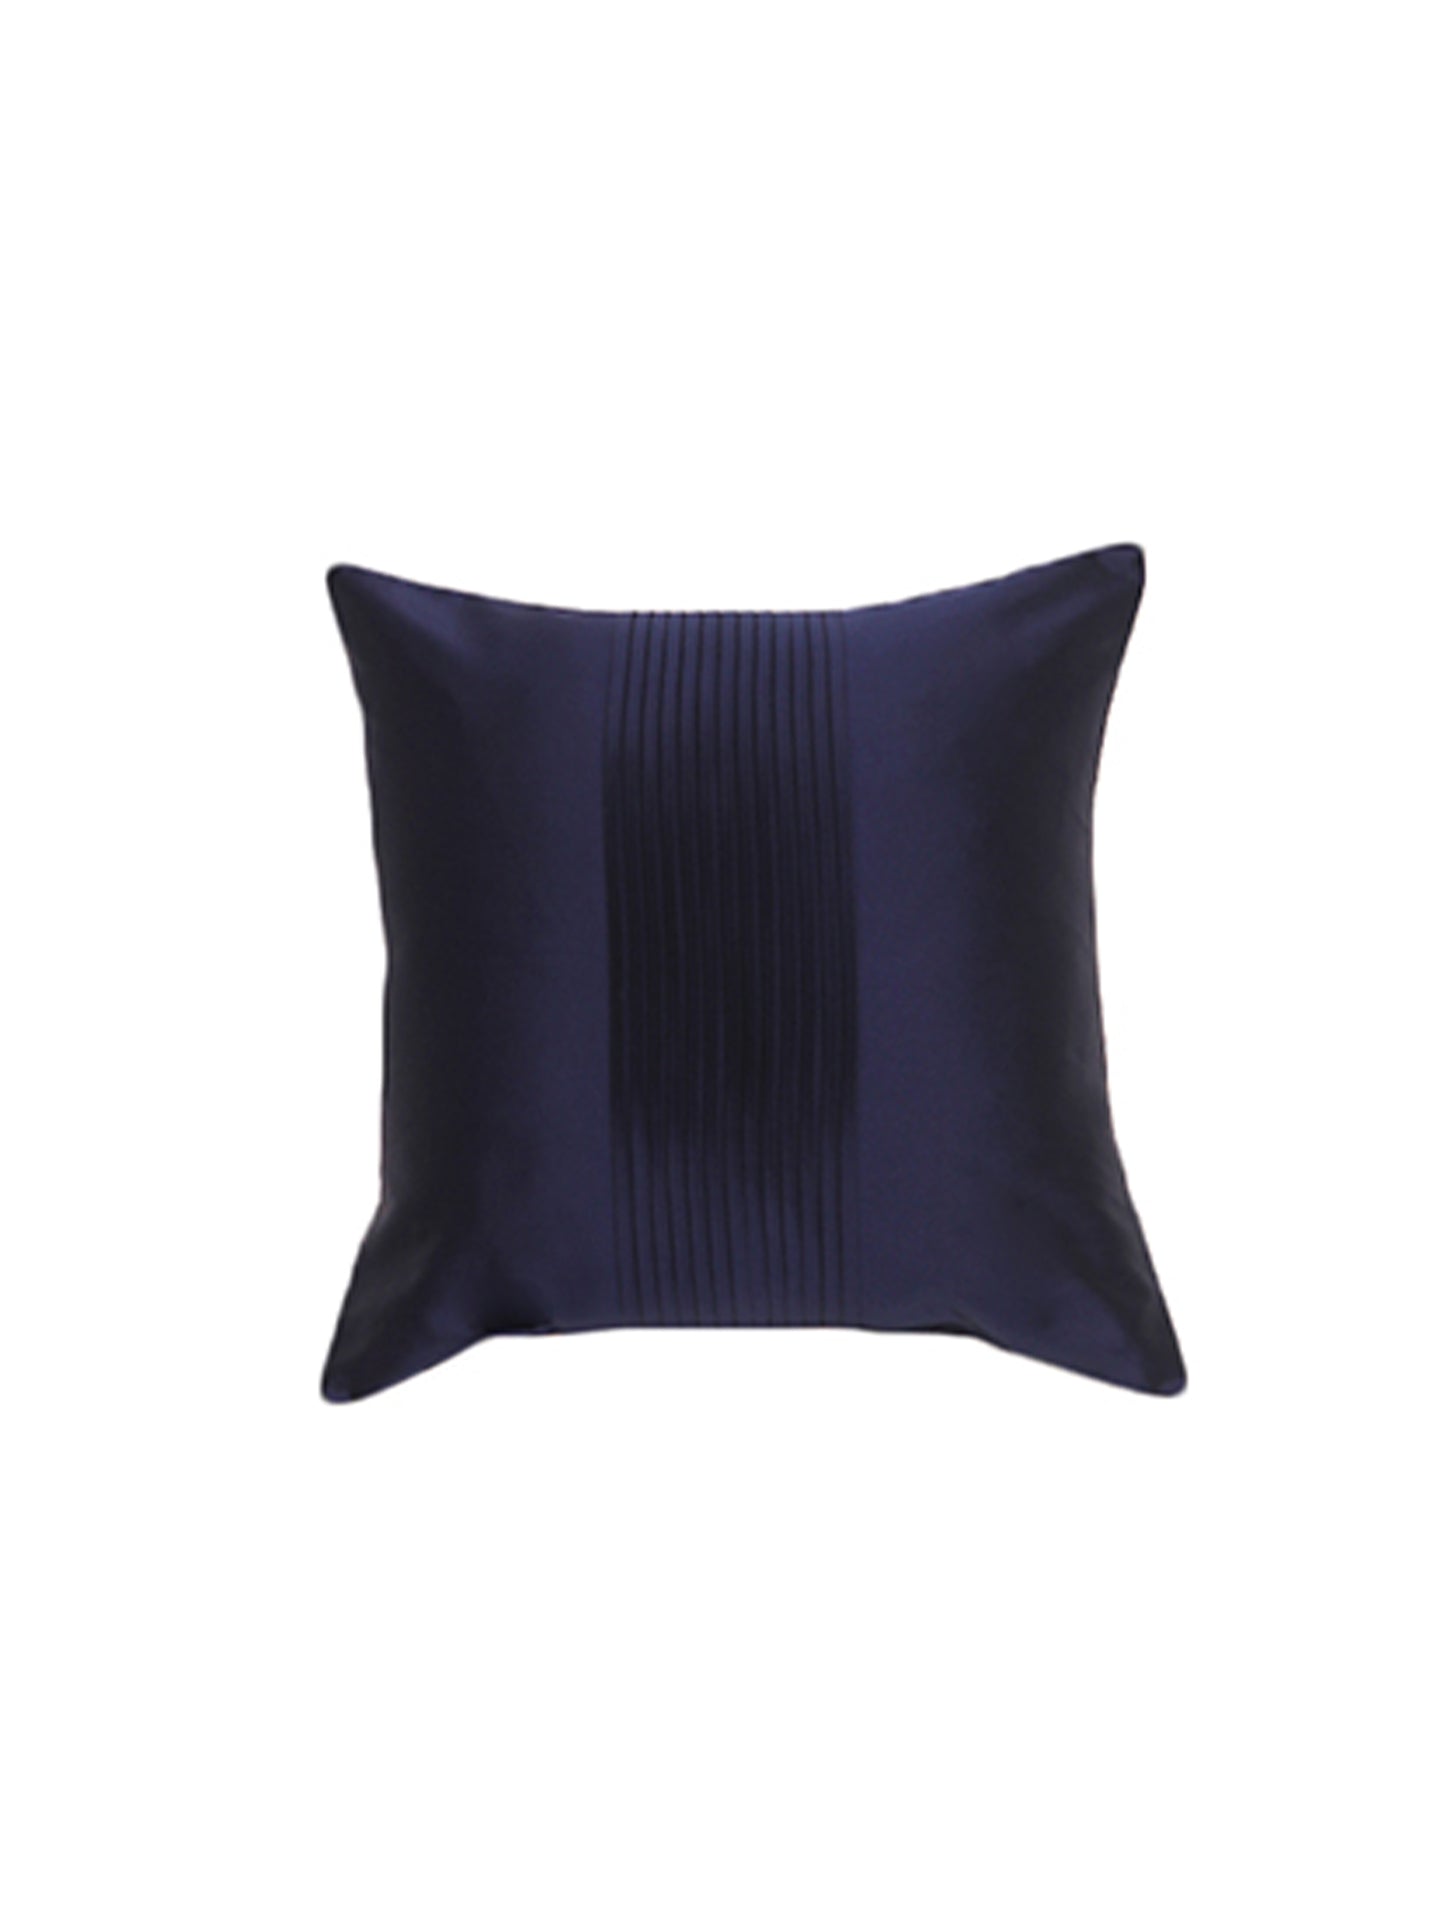 Pleating Cushion cover 100% Polyester in Dark Blue - 12"x12"